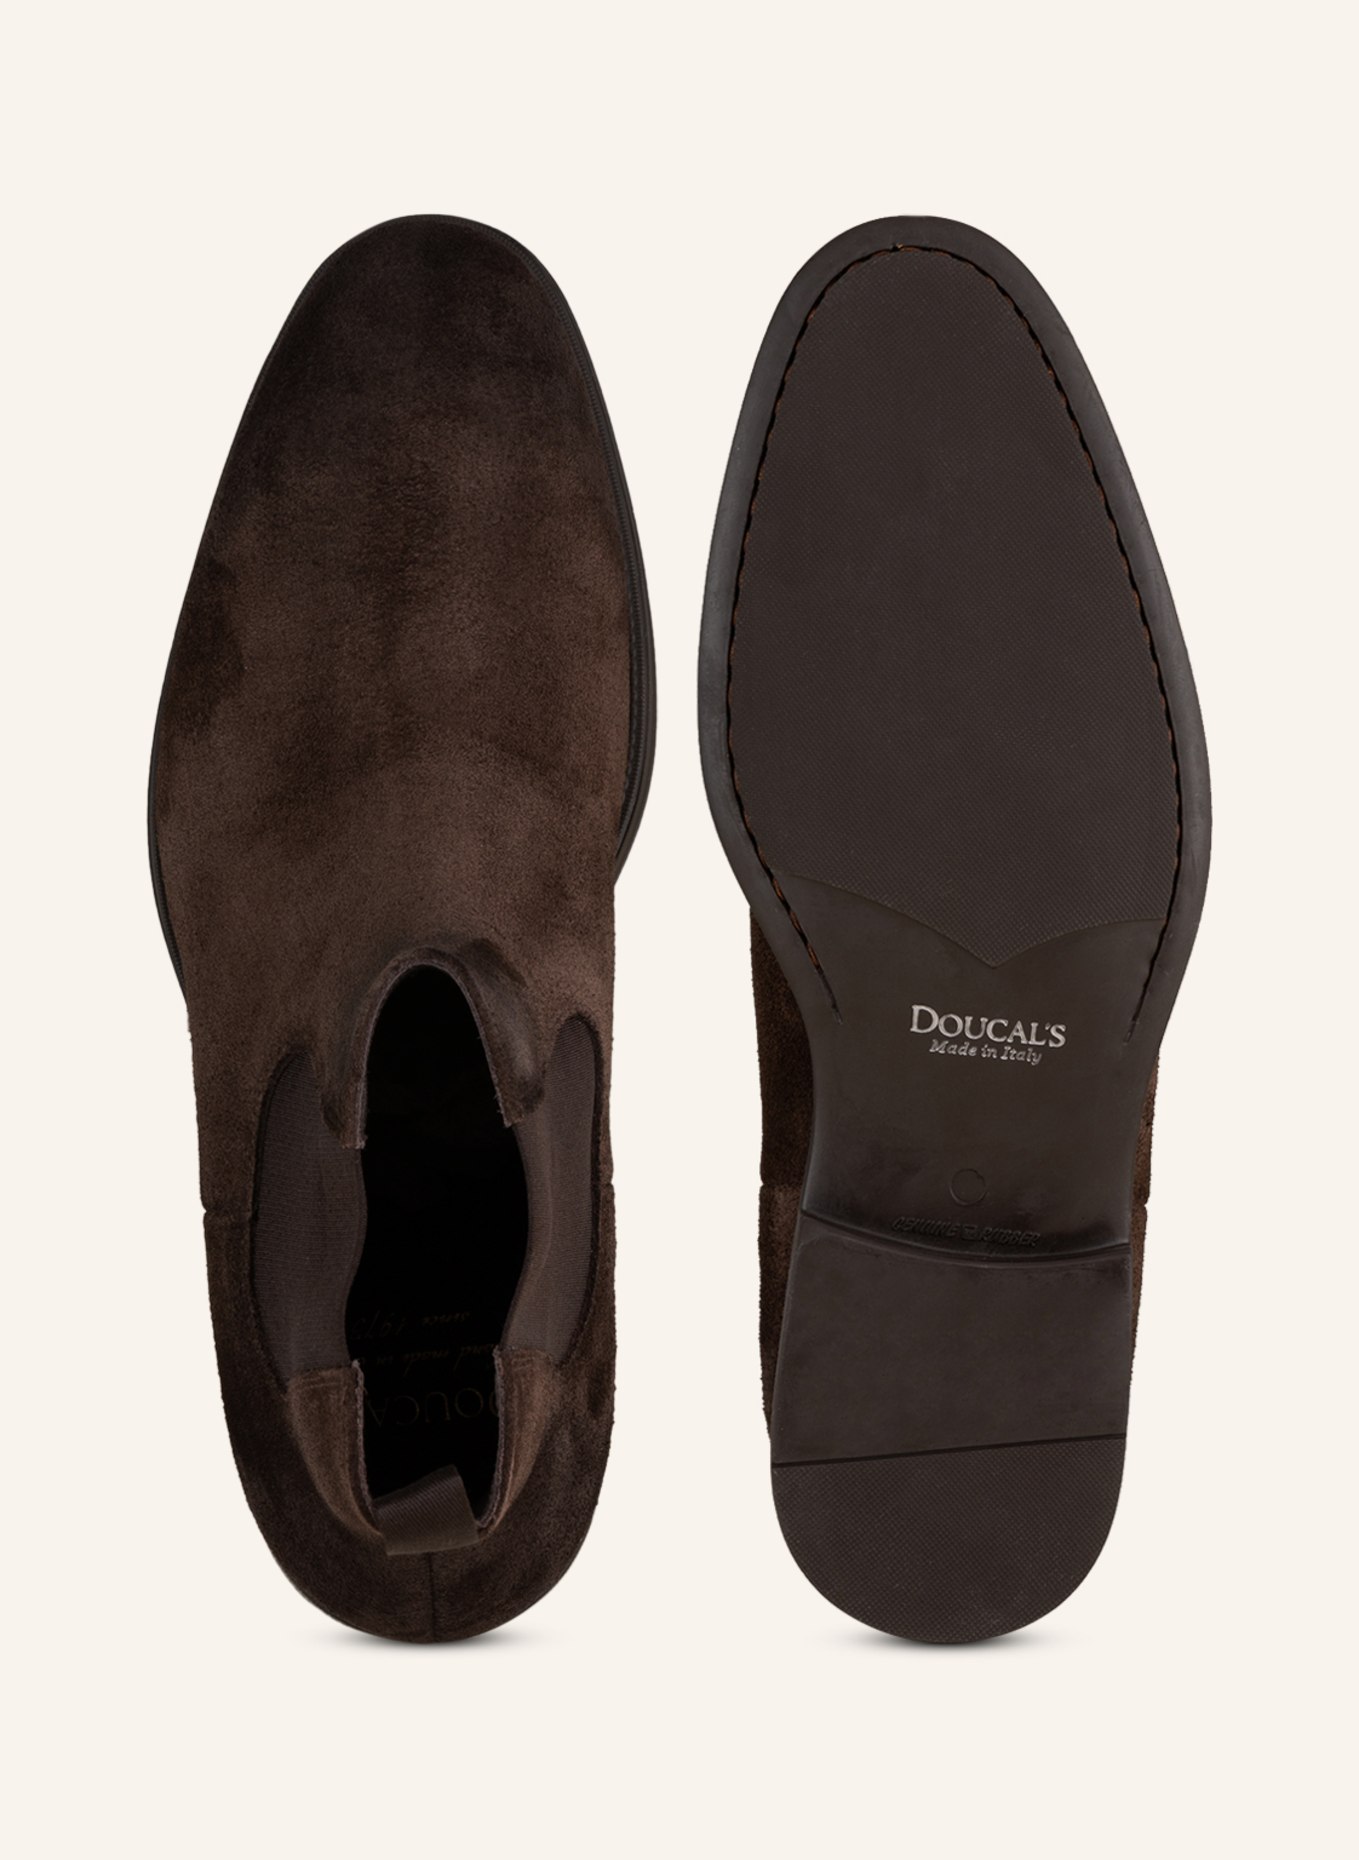 DOUCAL'S  boots, Color: DARK BROWN (Image 5)